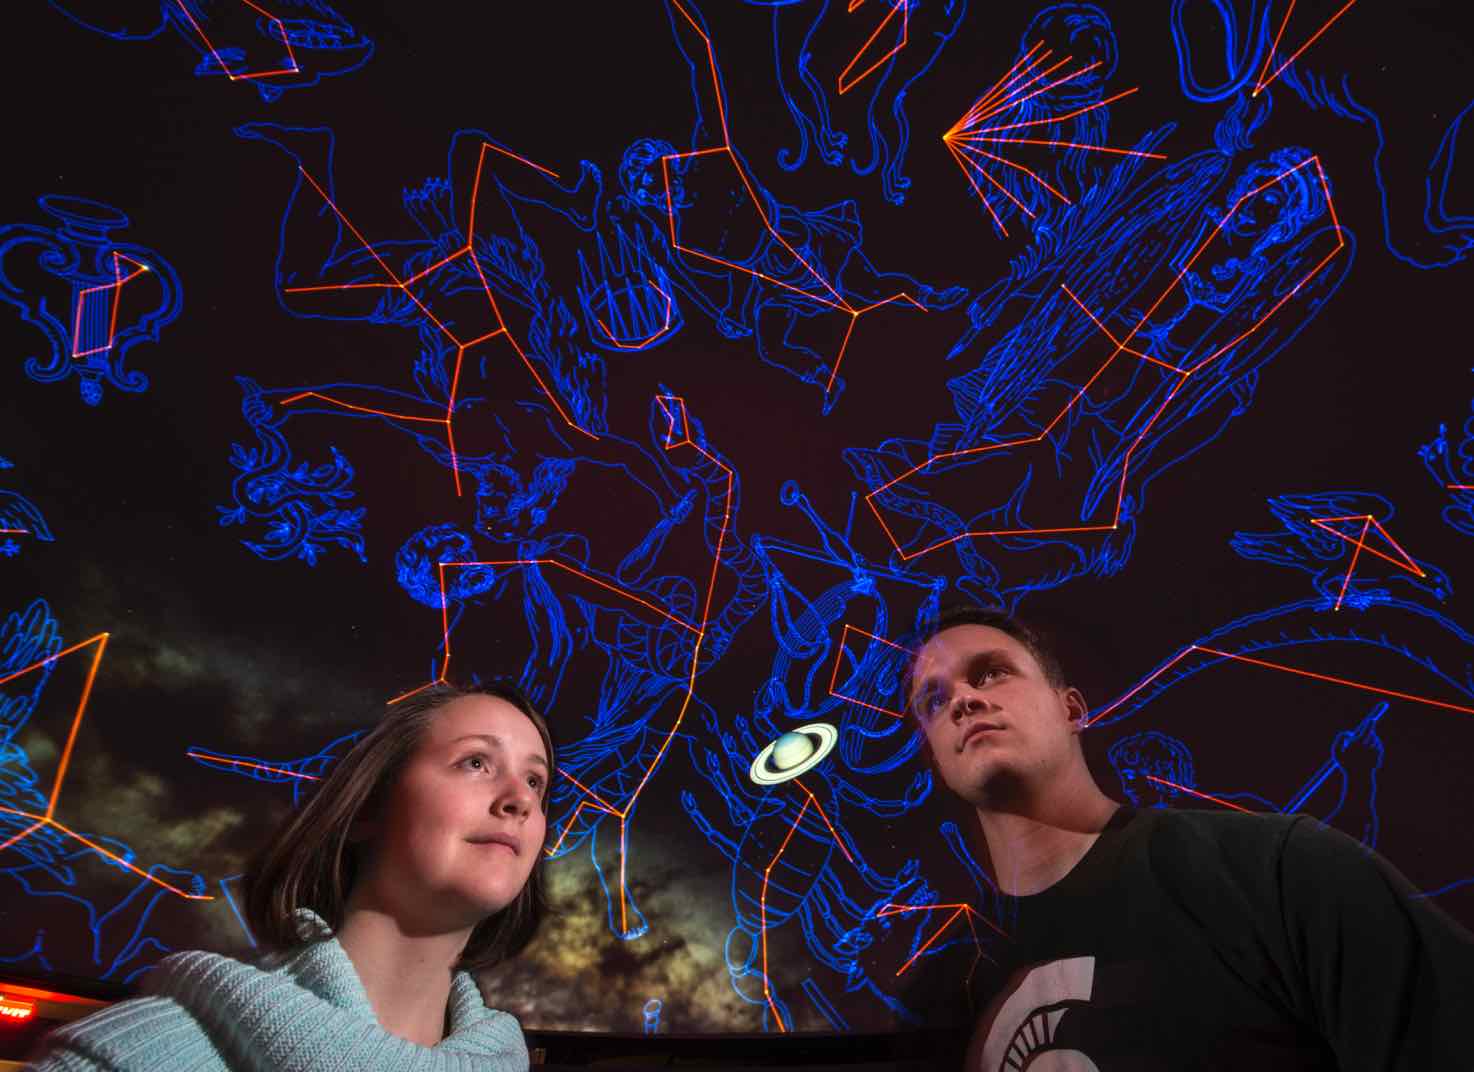 People gaze at constellations on the ceiling of the planetarium